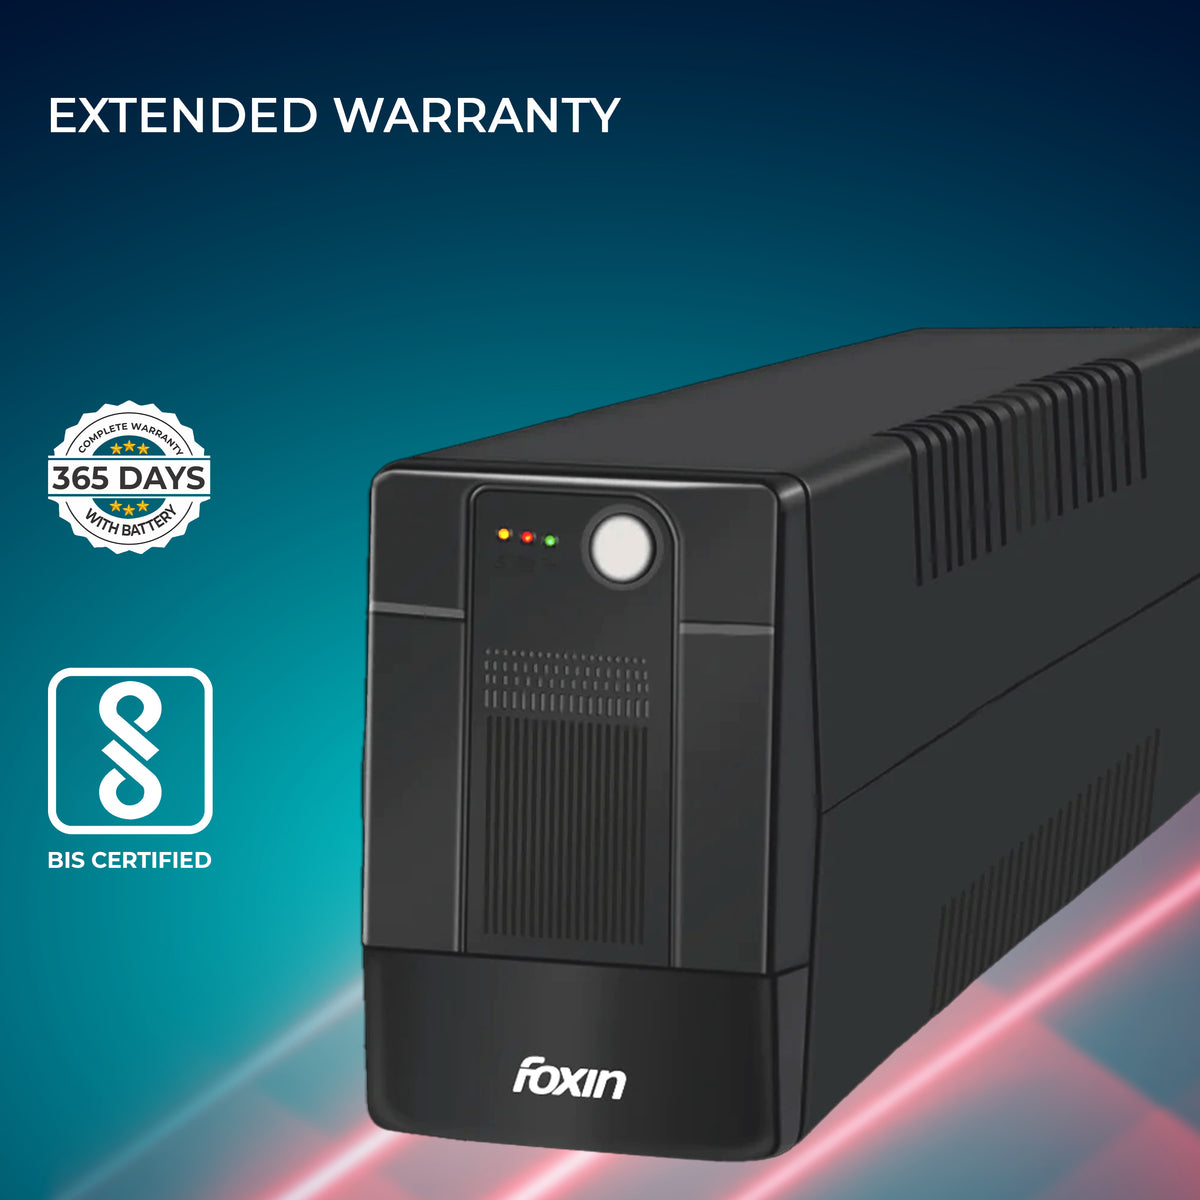 Foxin FPS-755/600VA Uninterrupted Power Supply (UPS), with LED Indicator &amp; Audible Alarm, Battery Overload Protection, UPS for PC | Desktop Computer | Laptops | Gaming PC | BIS Approved |  365 Days Warranty